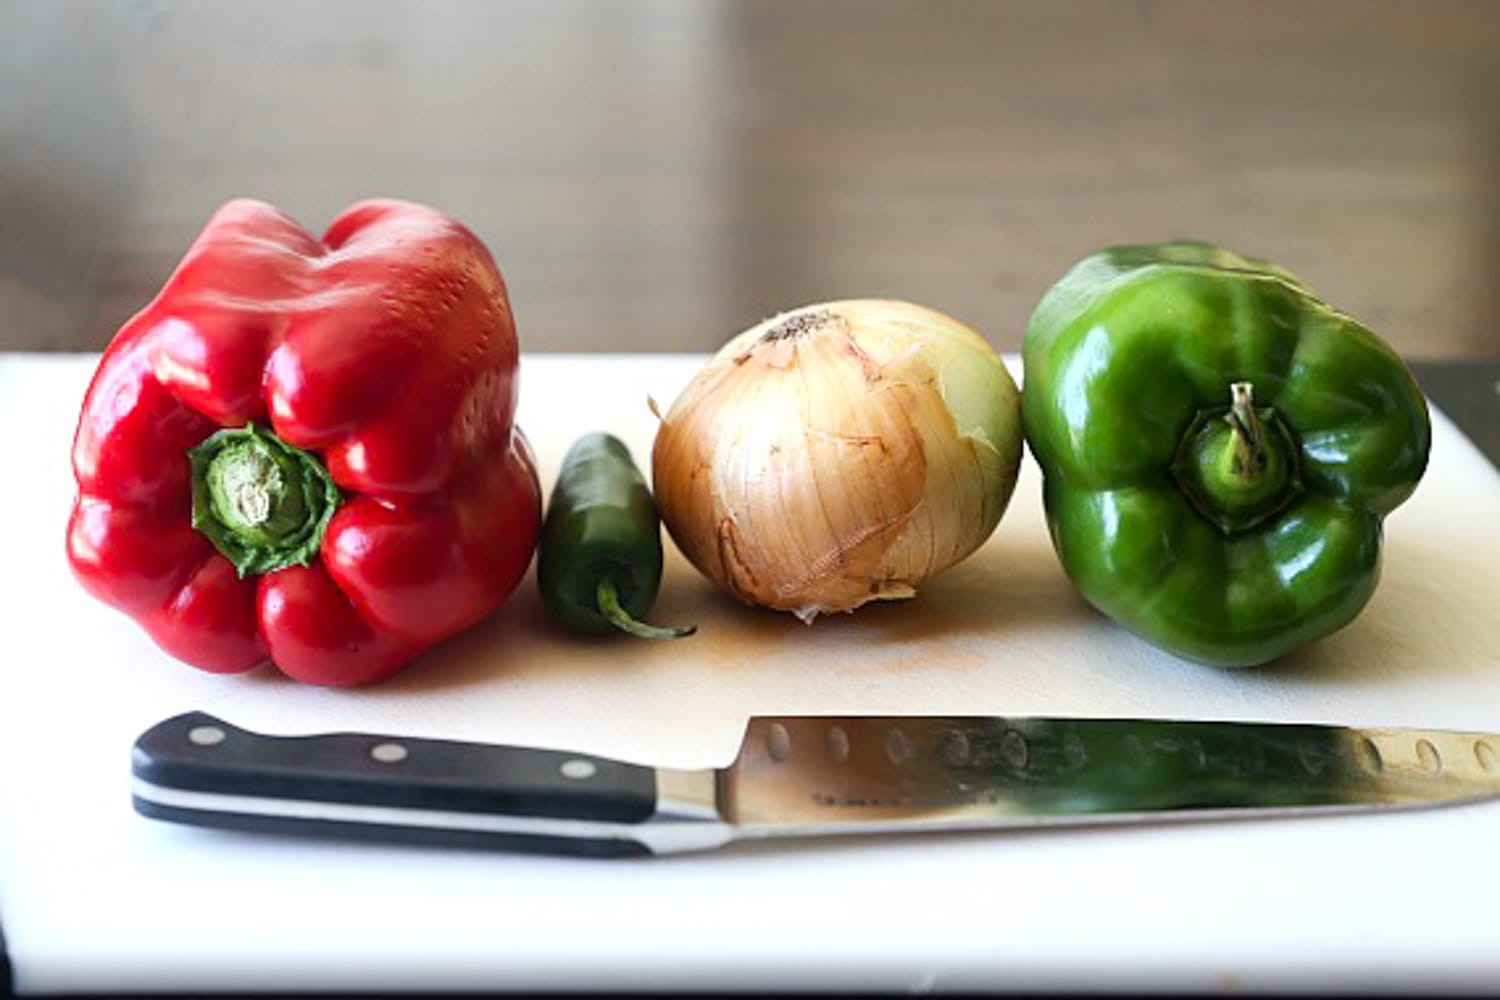 a red bell pepper, a jalapeno, a spanish onion, and a green bell pepper on a white cutting board with a chef's knife